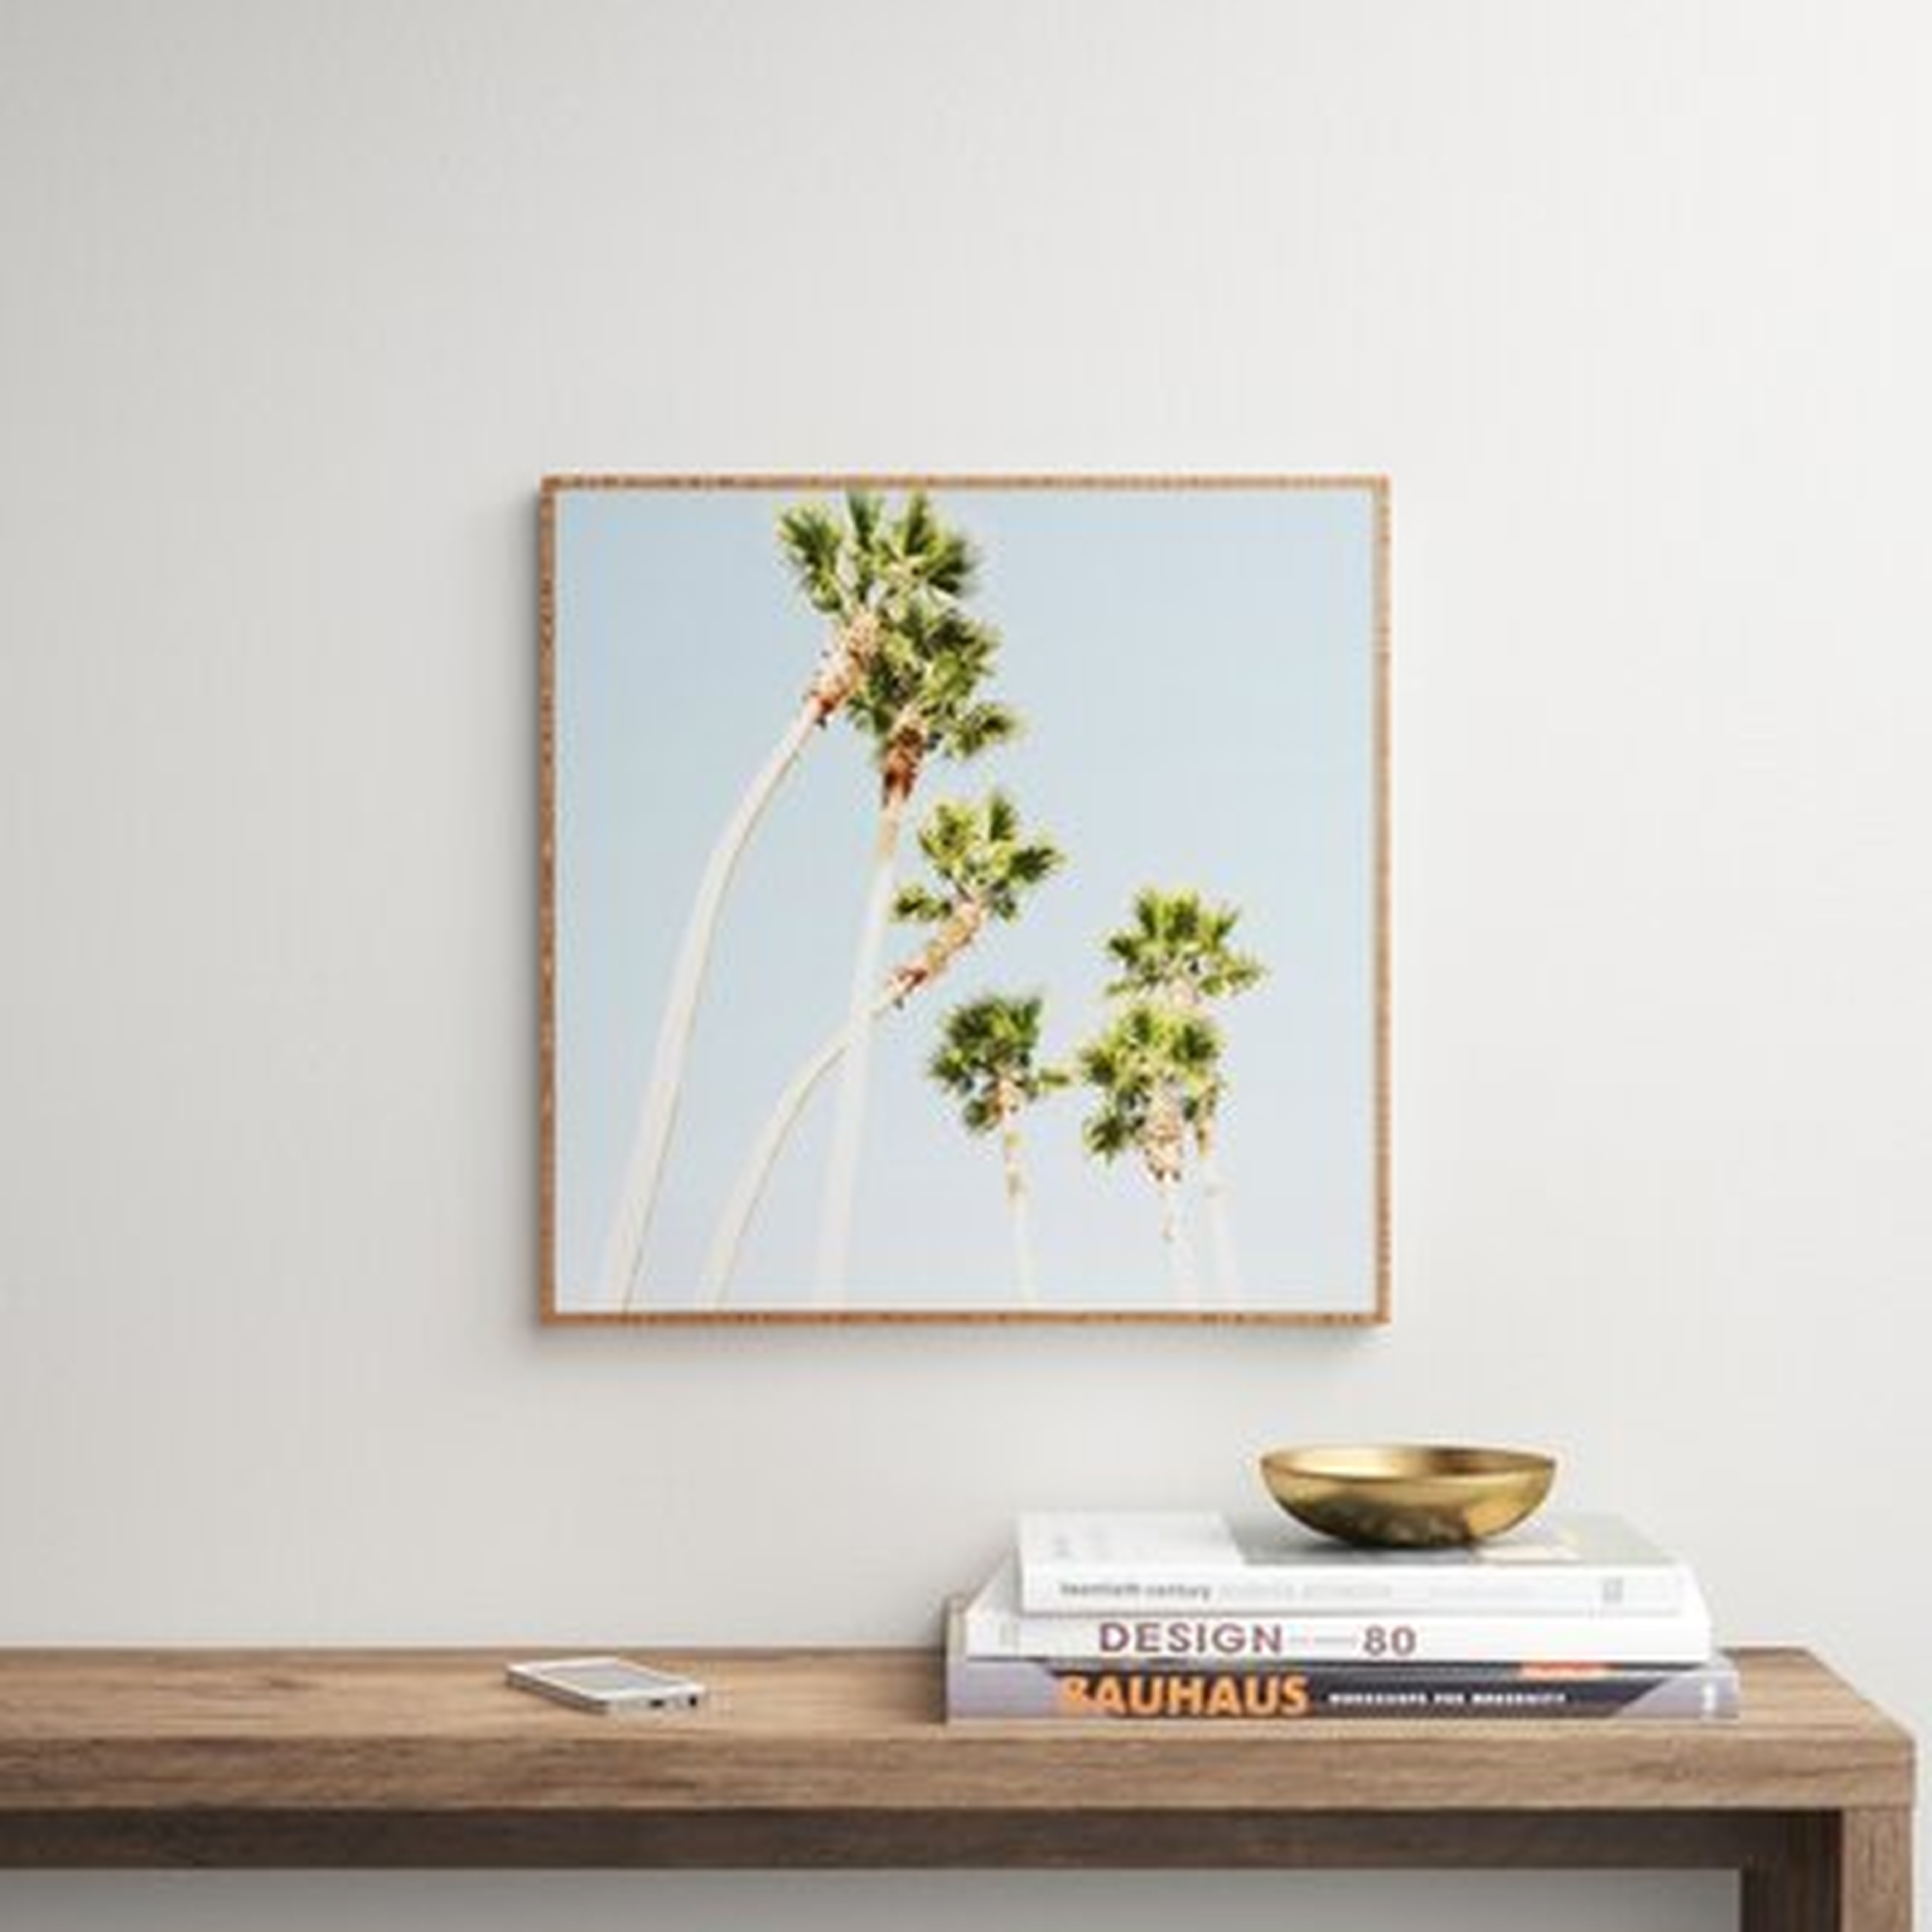 Beach Palms - Picture Frame Photograph Print on Paper - AllModern